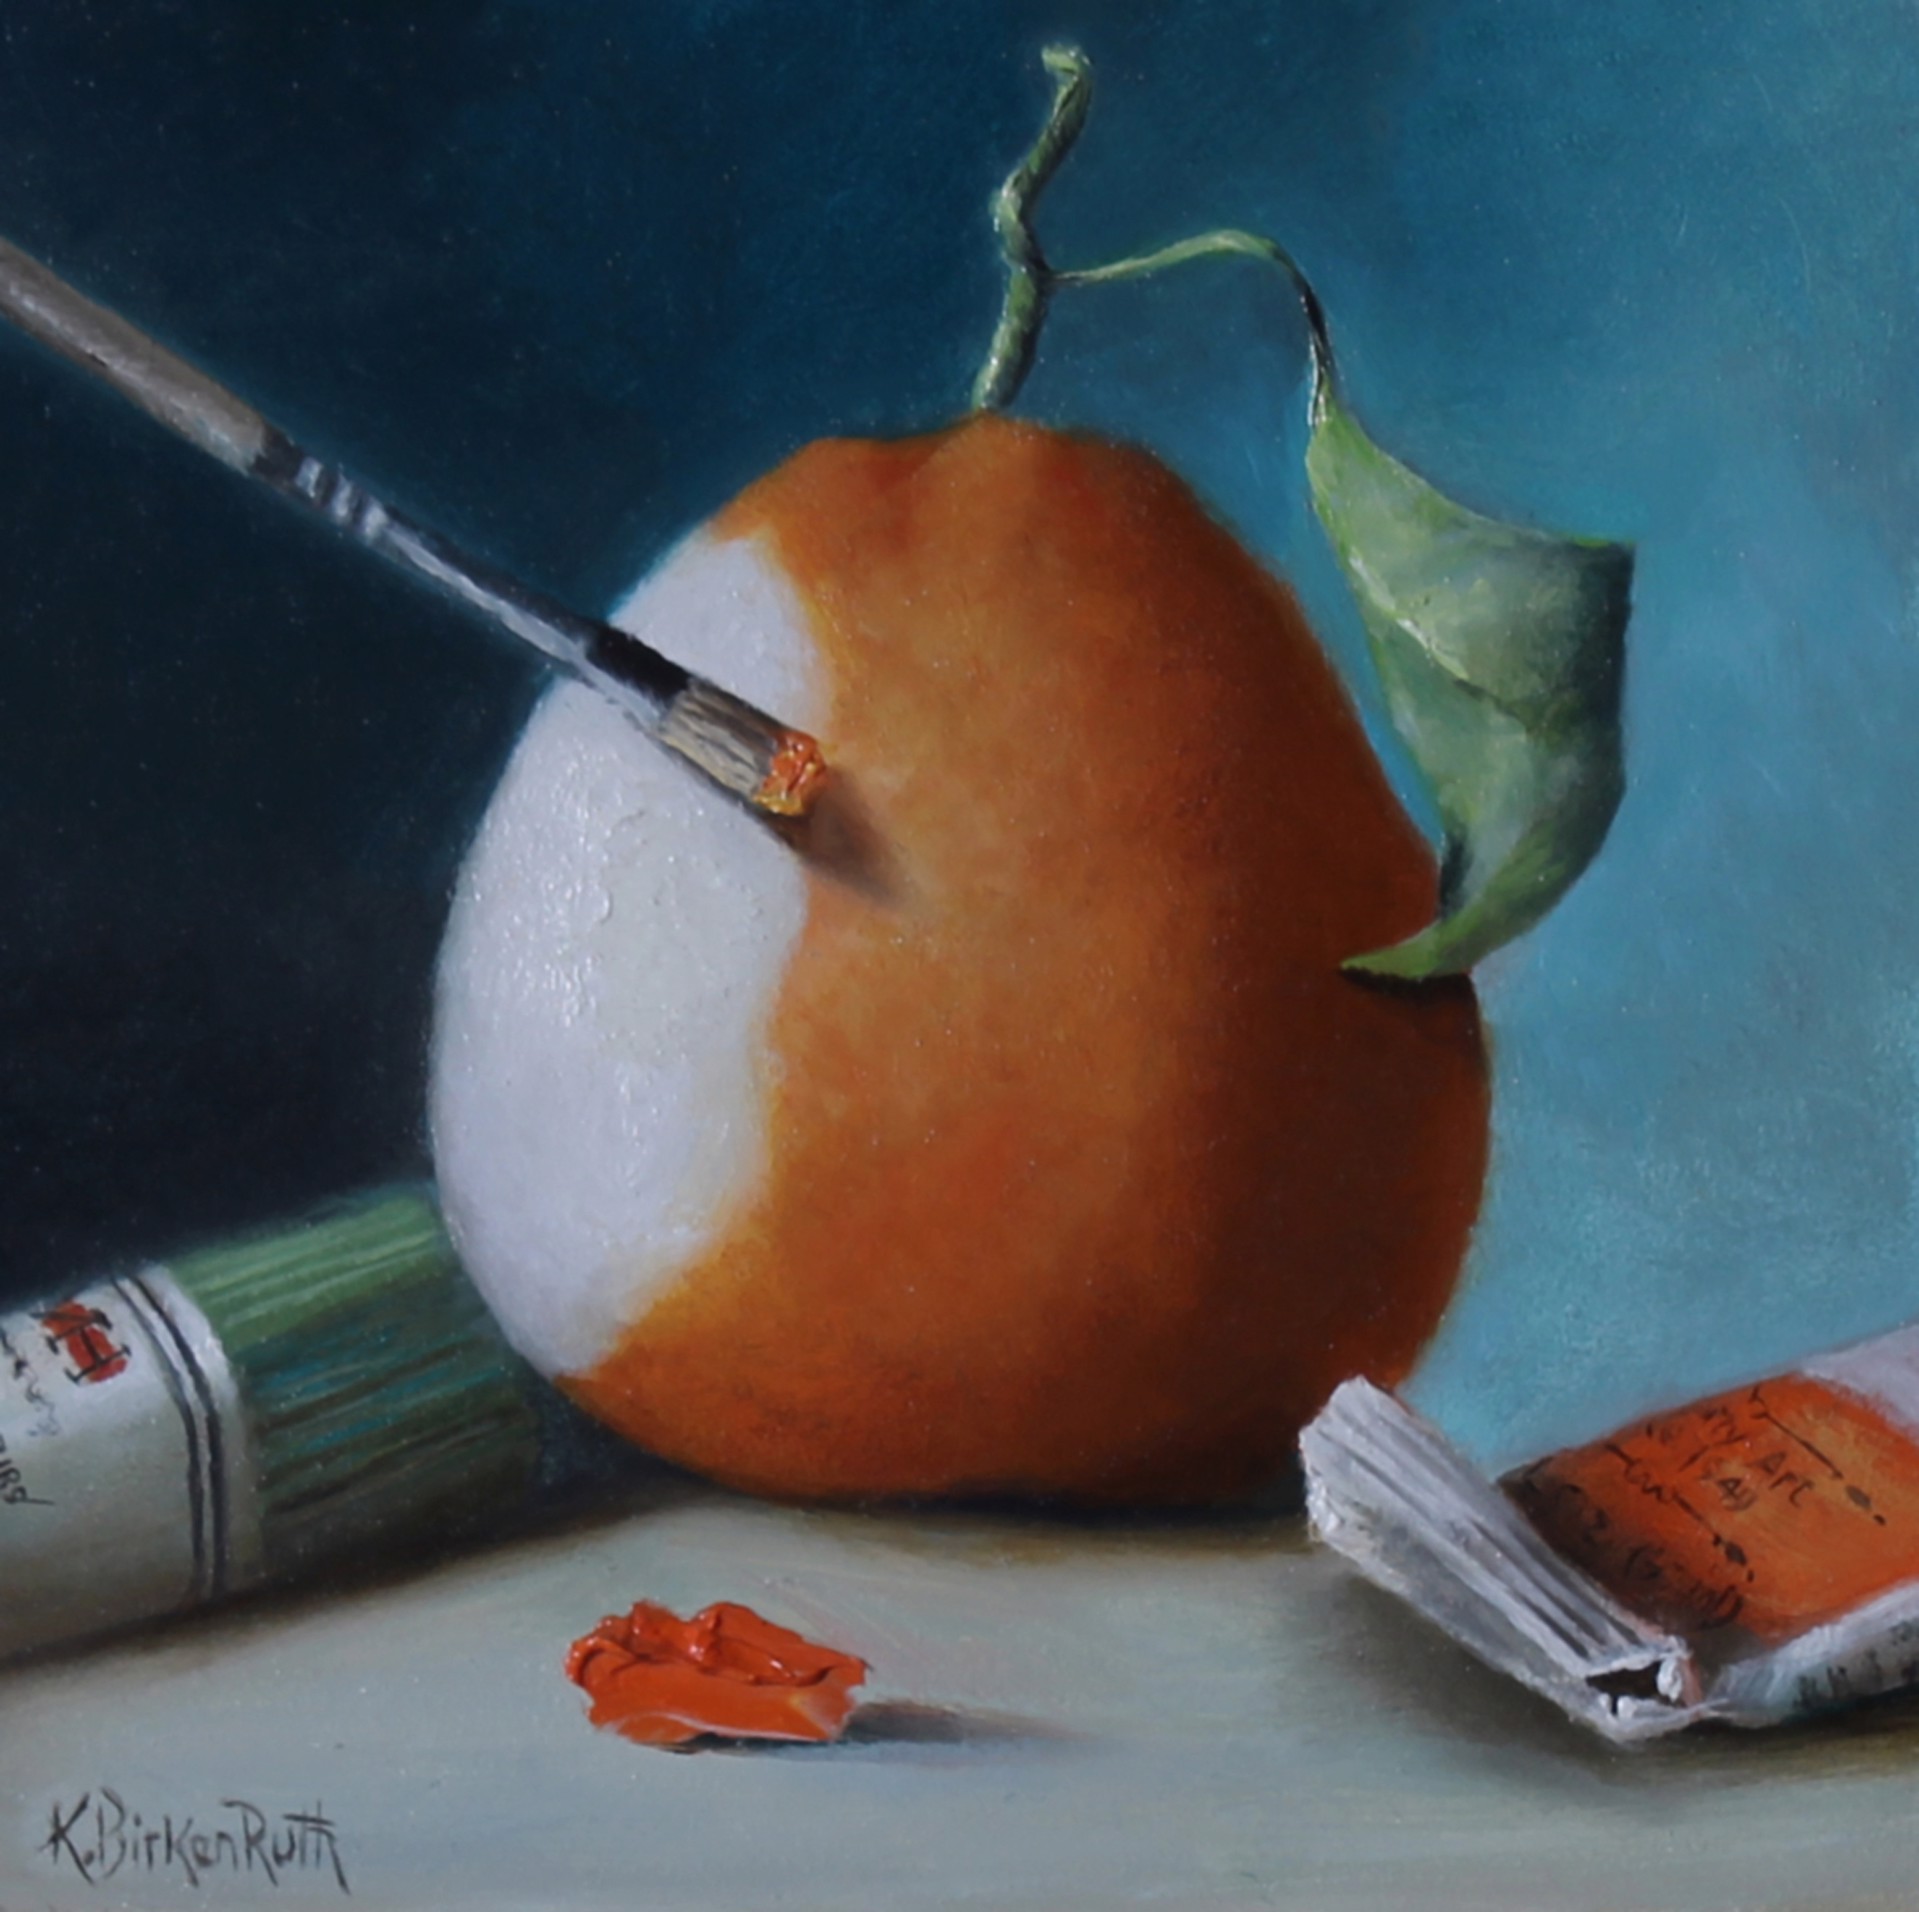 Almost finished with the Orange by Kelly Birkenruth